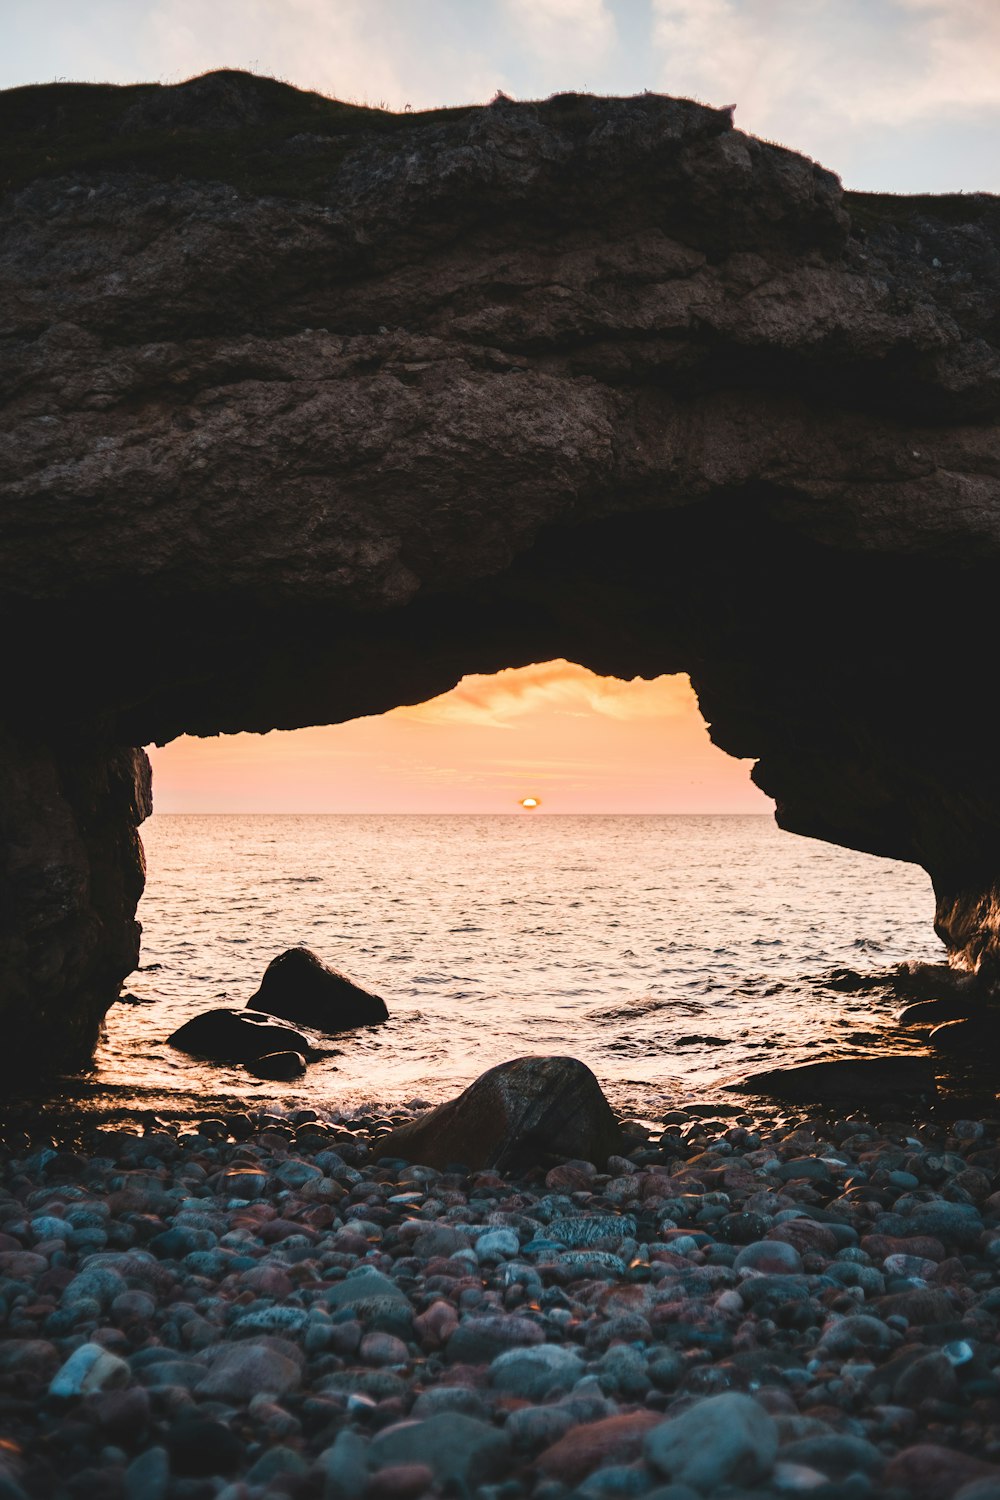 brown rock formation on sea during sunset